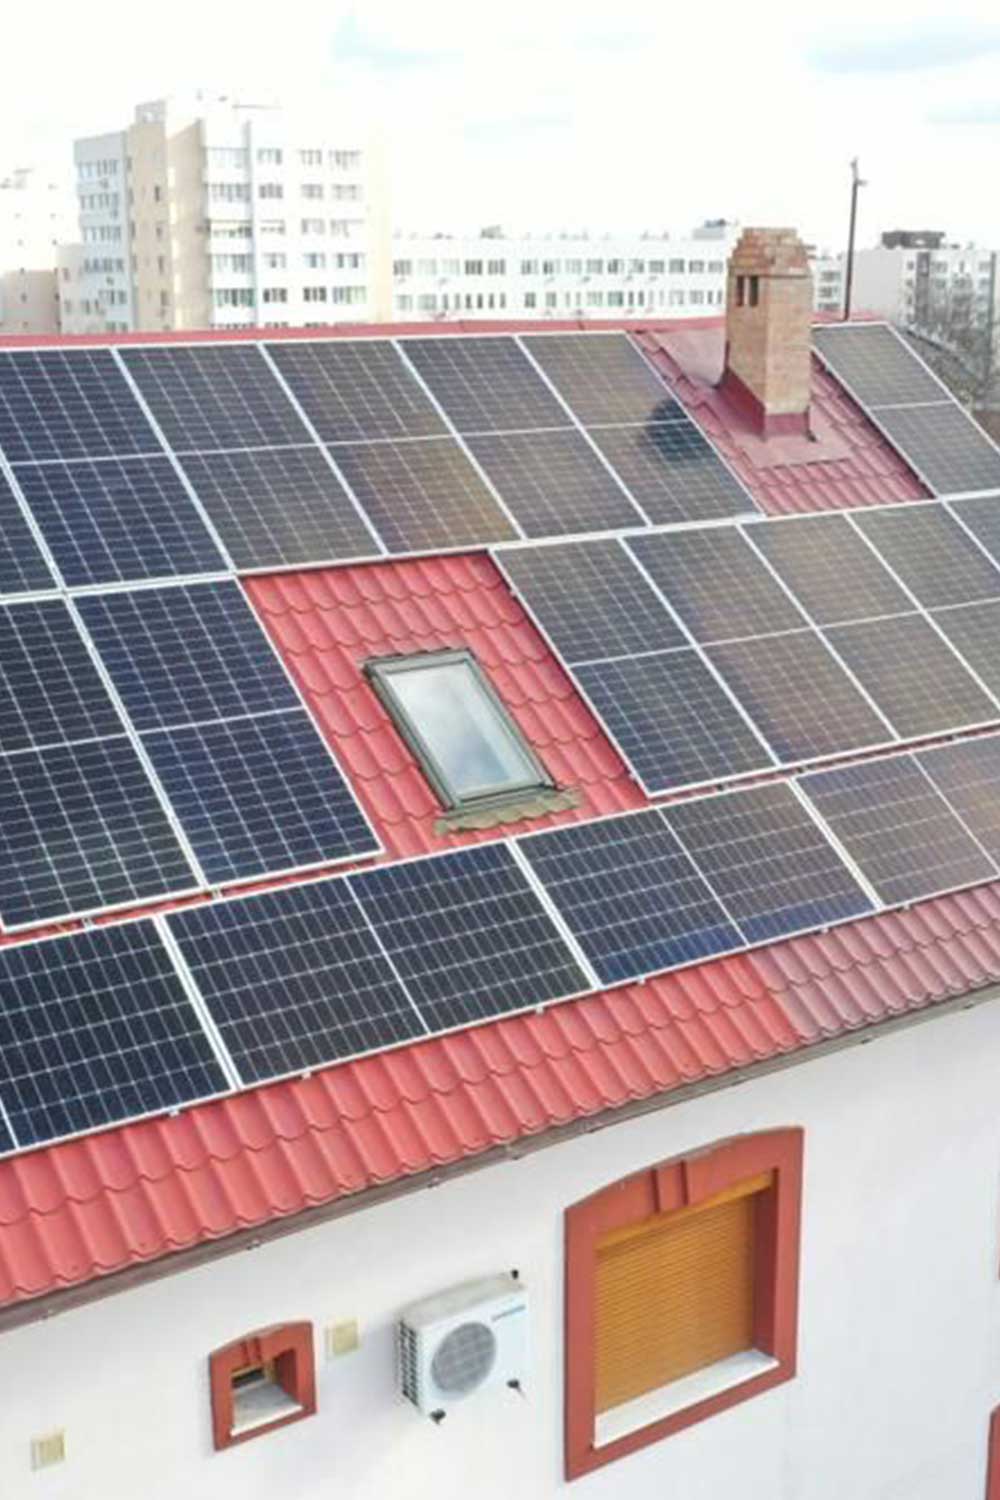 36-cell solar module for Rooftop